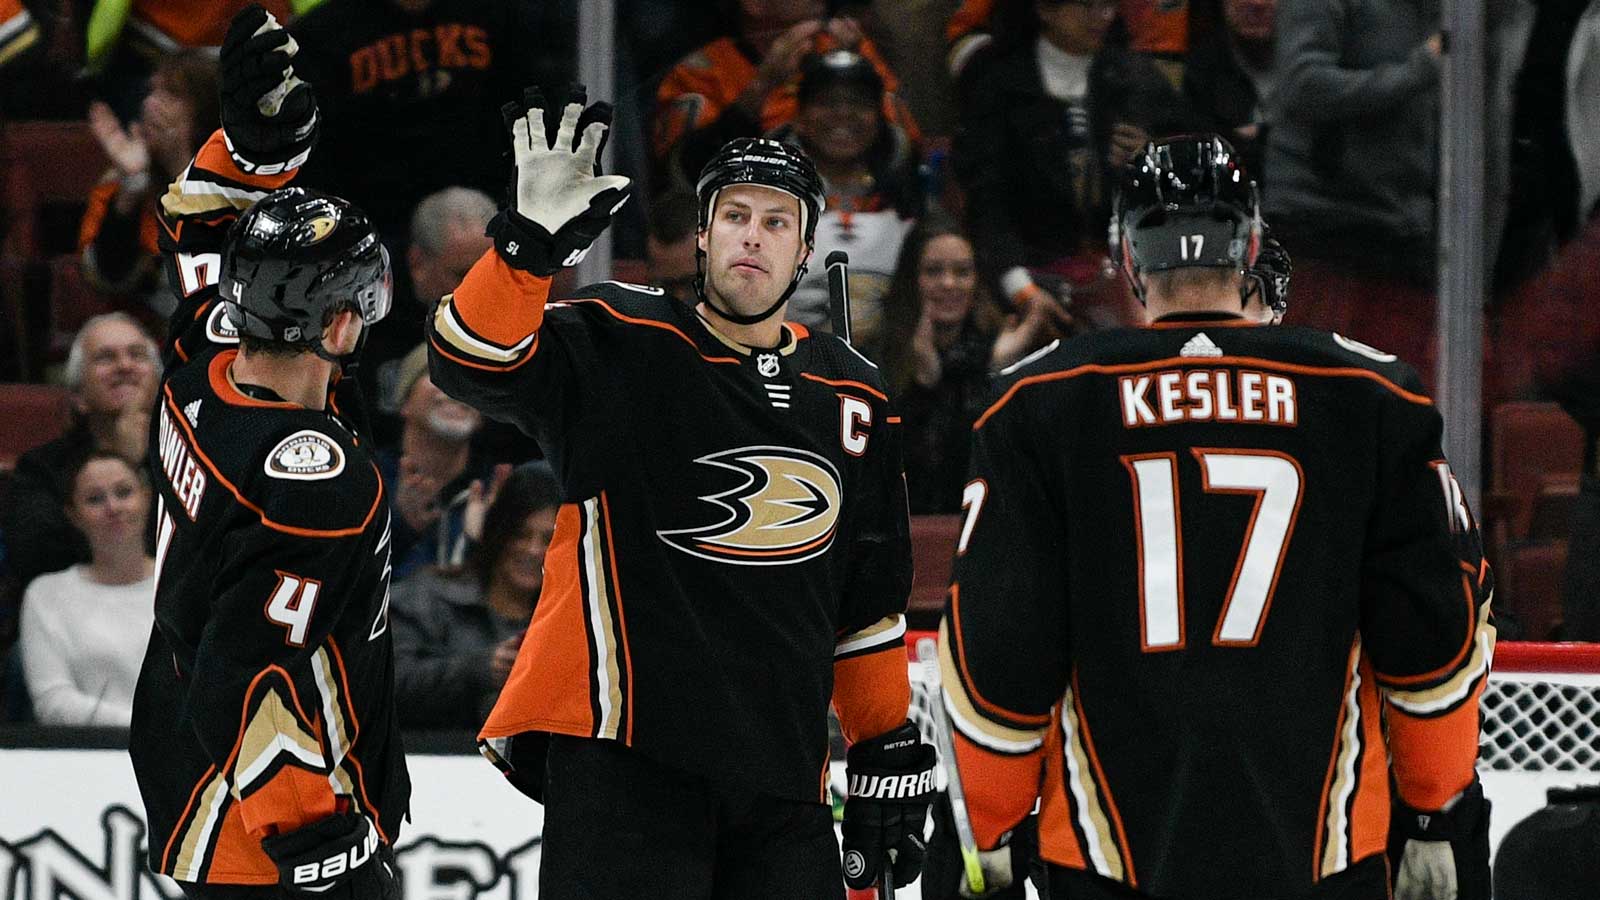 Ducks conclude homestand with visit from Jets